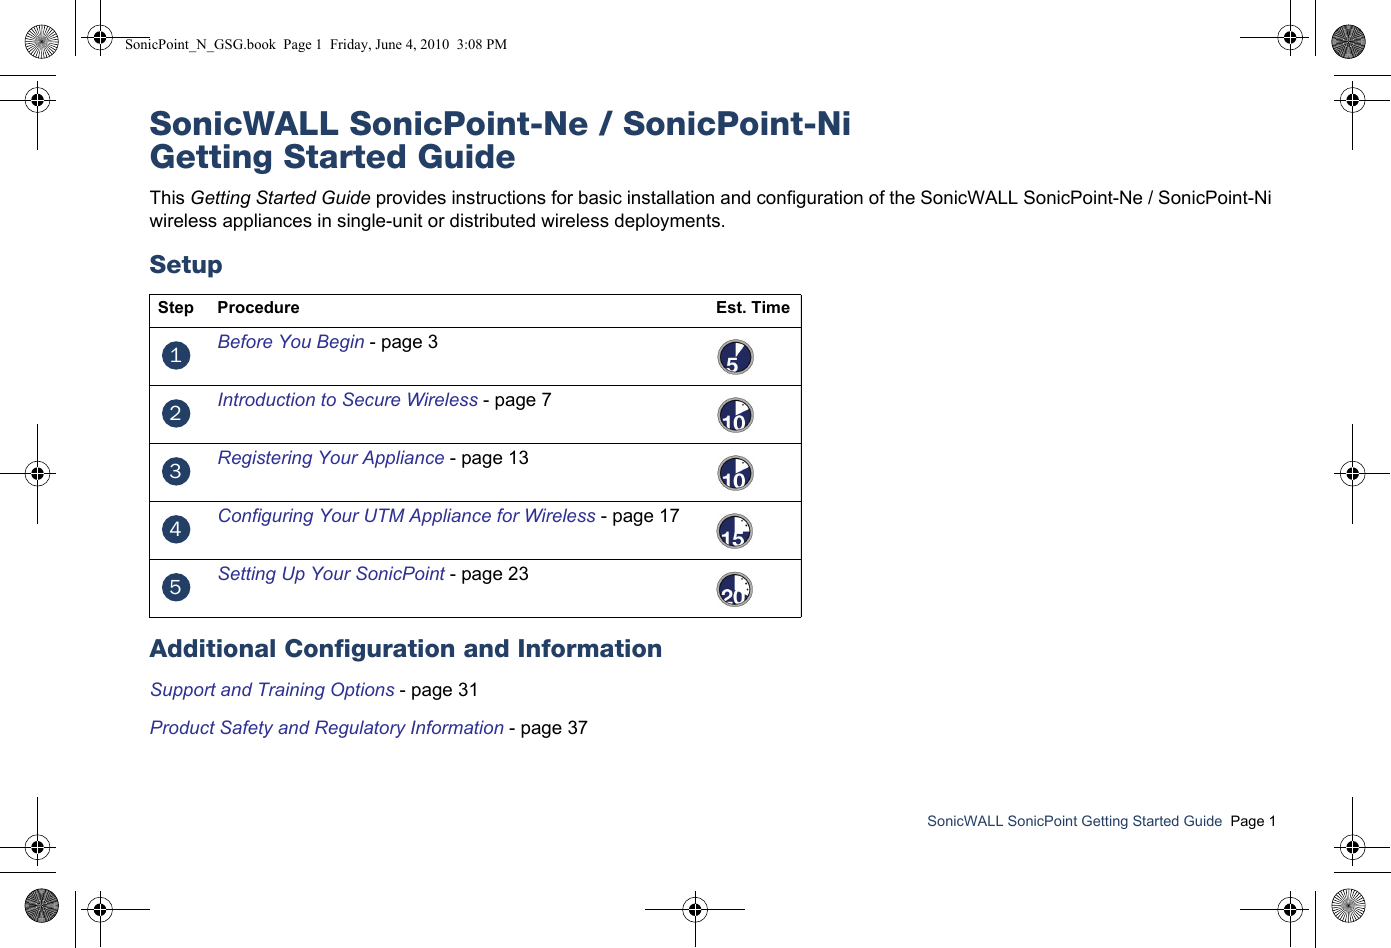 SonicWALL SonicPoint Getting Started Guide  Page 1SonicWALL SonicPoint-Ne / SonicPoint-NiGetting Started GuideThis Getting Started Guide provides instructions for basic installation and configuration of the SonicWALL SonicPoint-Ne / SonicPoint-Ni wireless appliances in single-unit or distributed wireless deployments.SetupAdditional Configuration and InformationSupport and Training Options - page 31Product Safety and Regulatory Information - page 37Step Procedure Est. TimeBefore You Begin - page 3Introduction to Secure Wireless - page 7Registering Your Appliance - page 13Configuring Your UTM Appliance for Wireless - page 17Setting Up Your SonicPoint - page 2312345SonicPoint_N_GSG.book  Page 1  Friday, June 4, 2010  3:08 PM